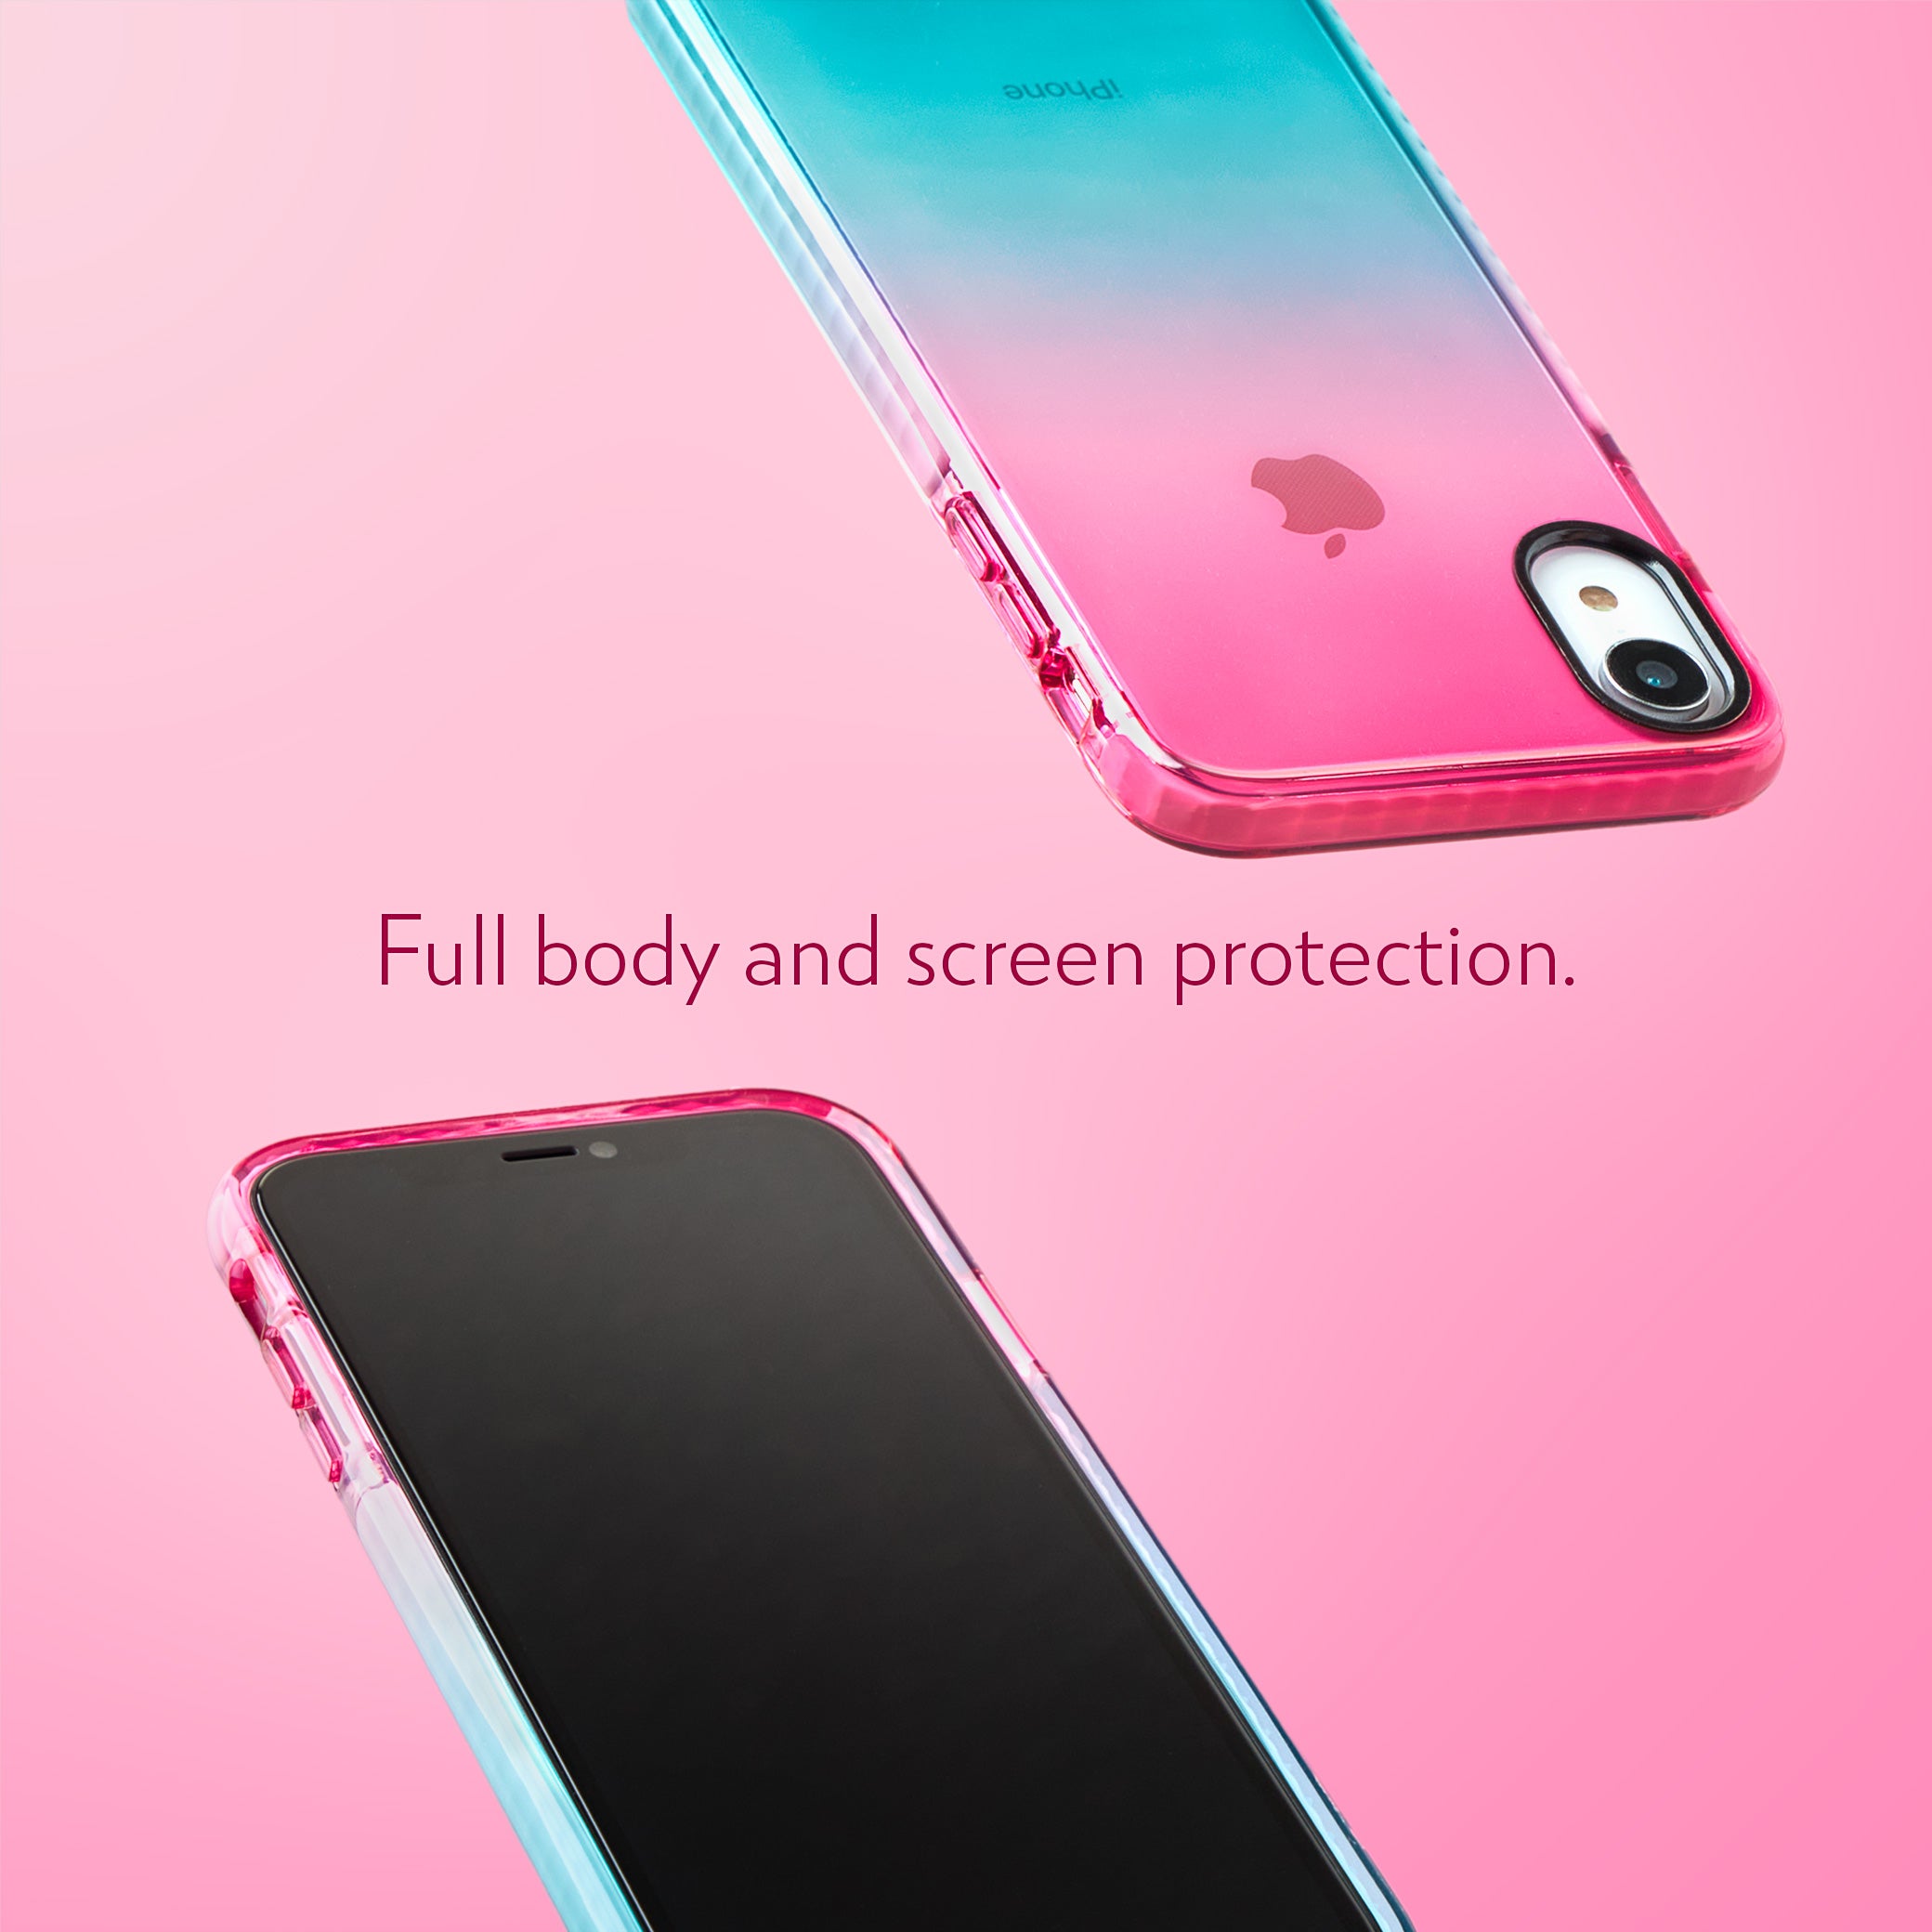 Barrier Case for iPhone XR - Blue n Pink Gradient Sunset